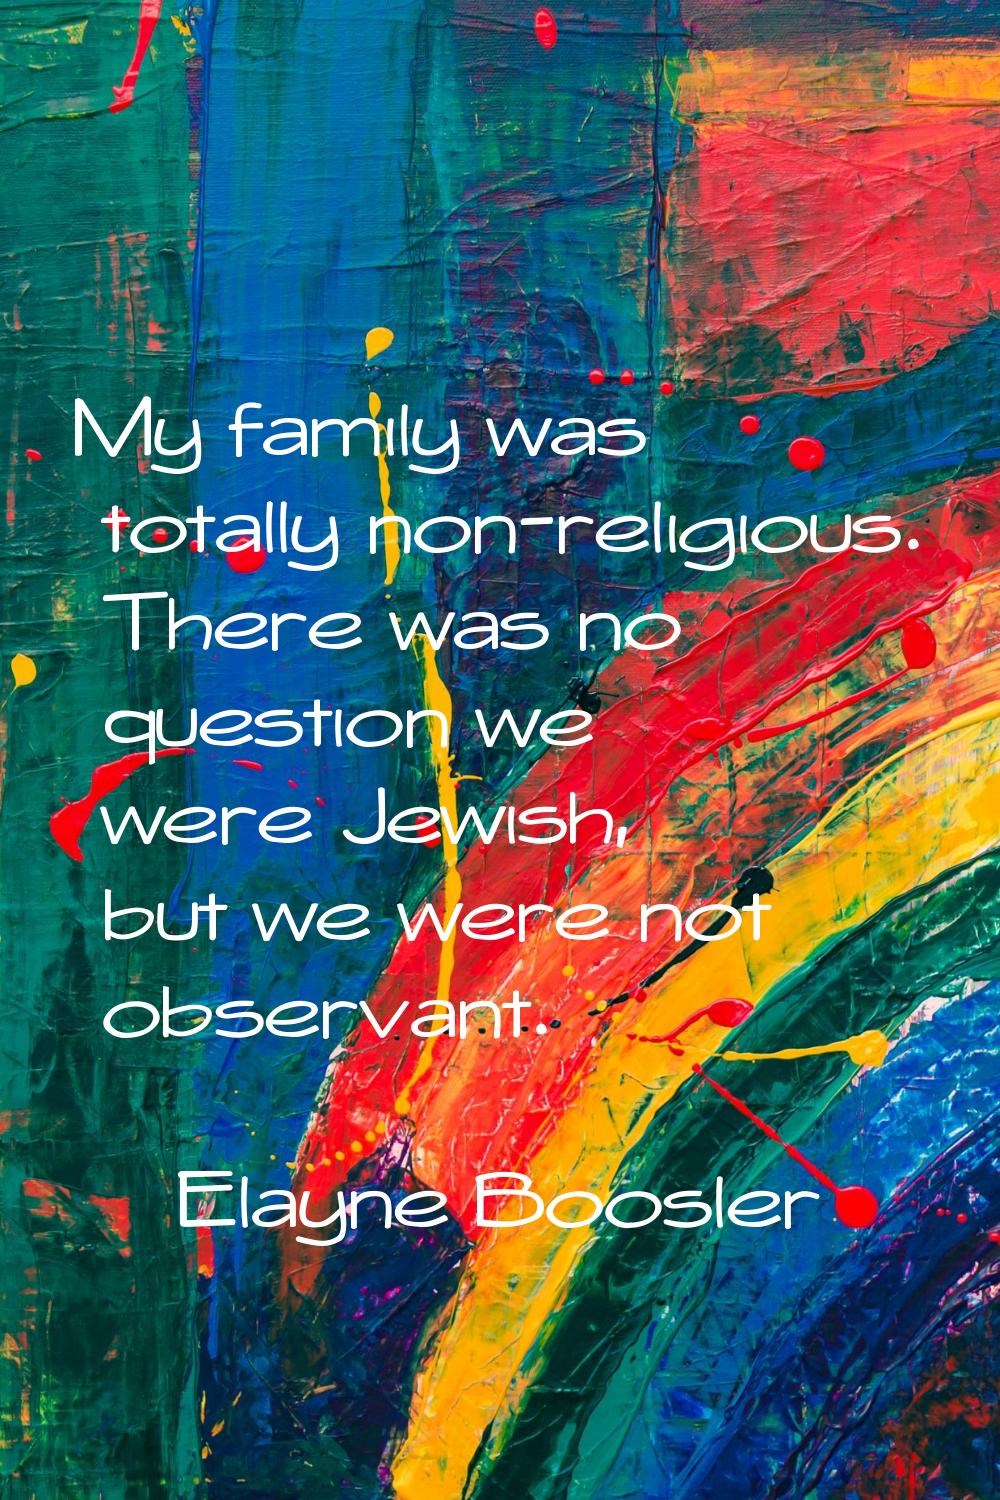 My family was totally non-religious. There was no question we were Jewish, but we were not observan